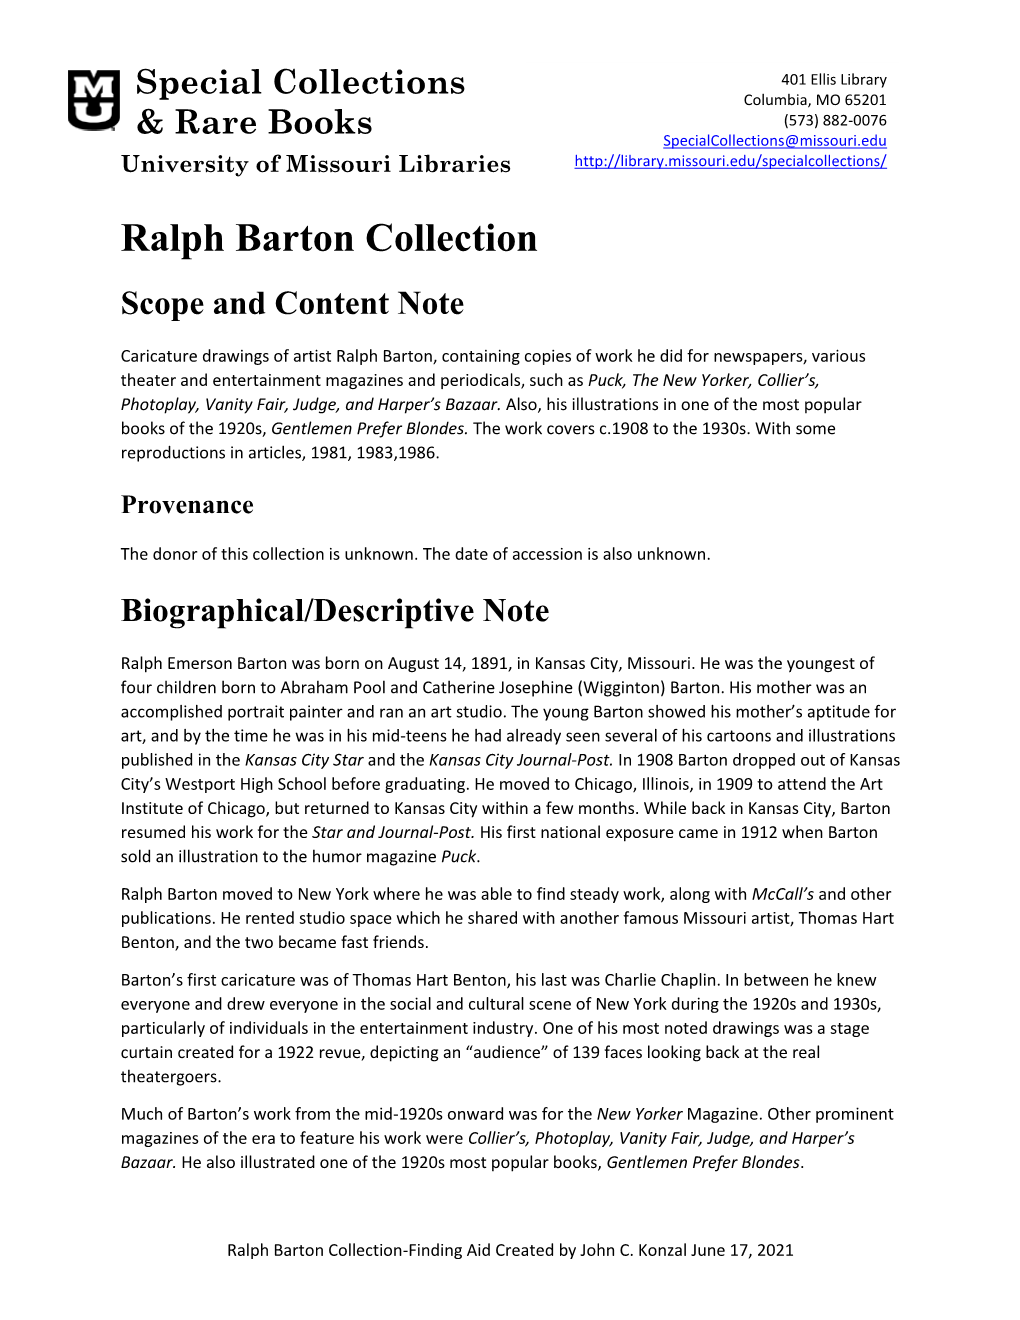 Ralph Barton Collection Scope and Content Note